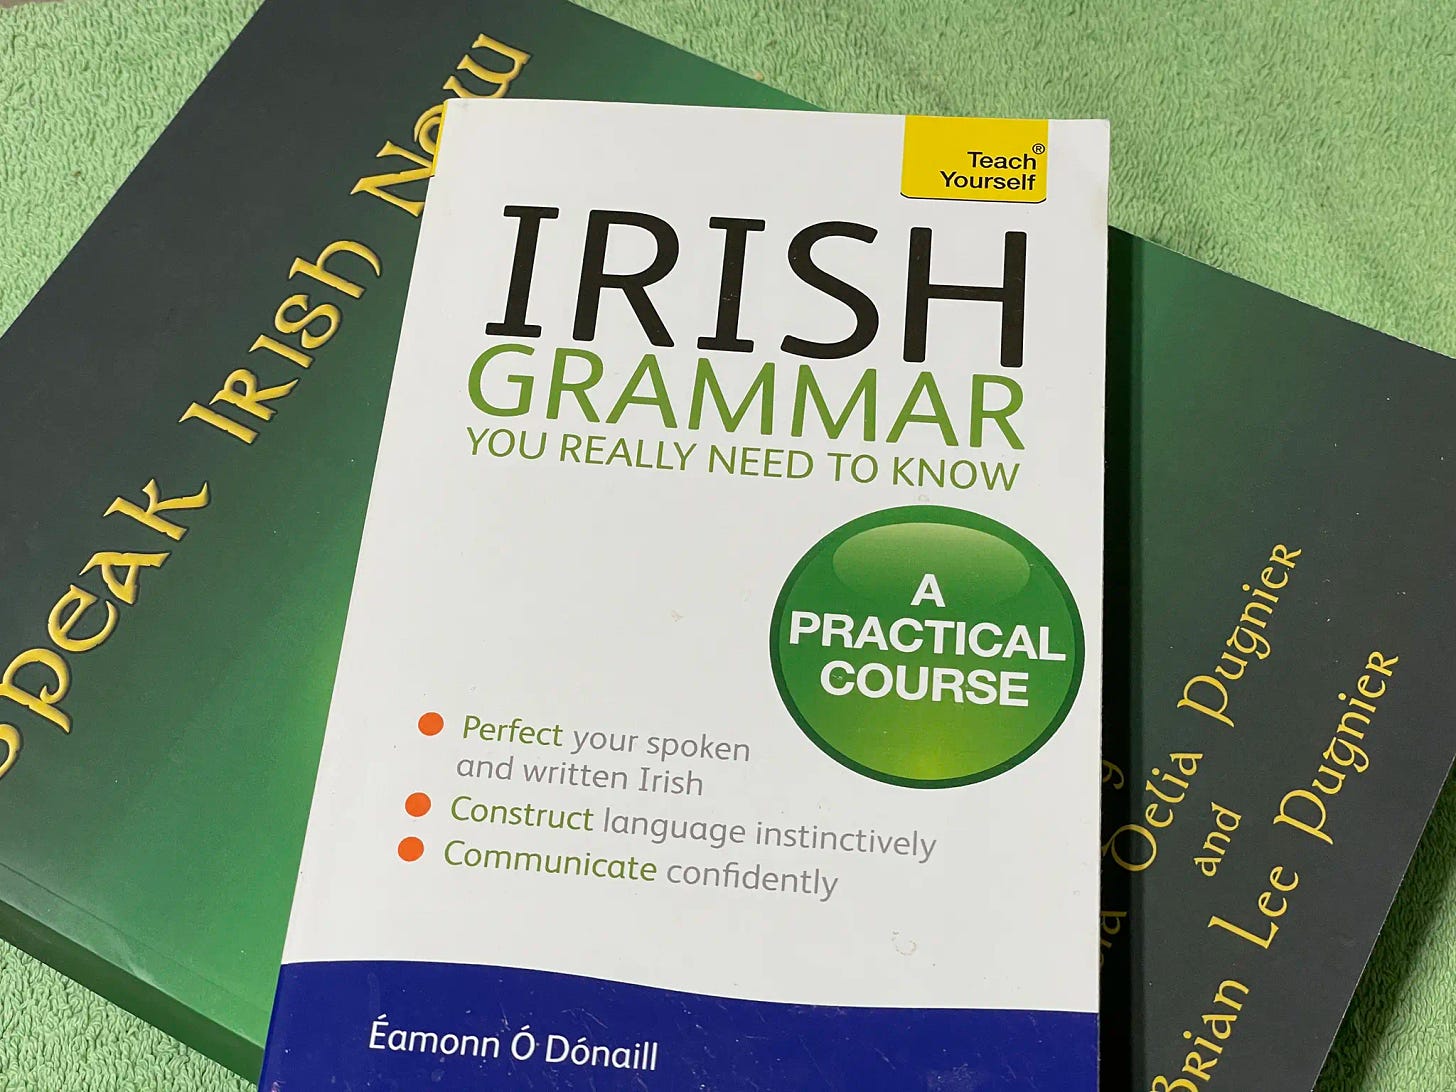 An image of a white book, “Irish Grammar You Really Need to Know”, arranged vertically laid on top of a green book, “Speak Irish Now”.An image of a white book, “Irish Grammar You Really Need to Know”, arranged vertically laid on top of a green book, “Speak Irish Now”.